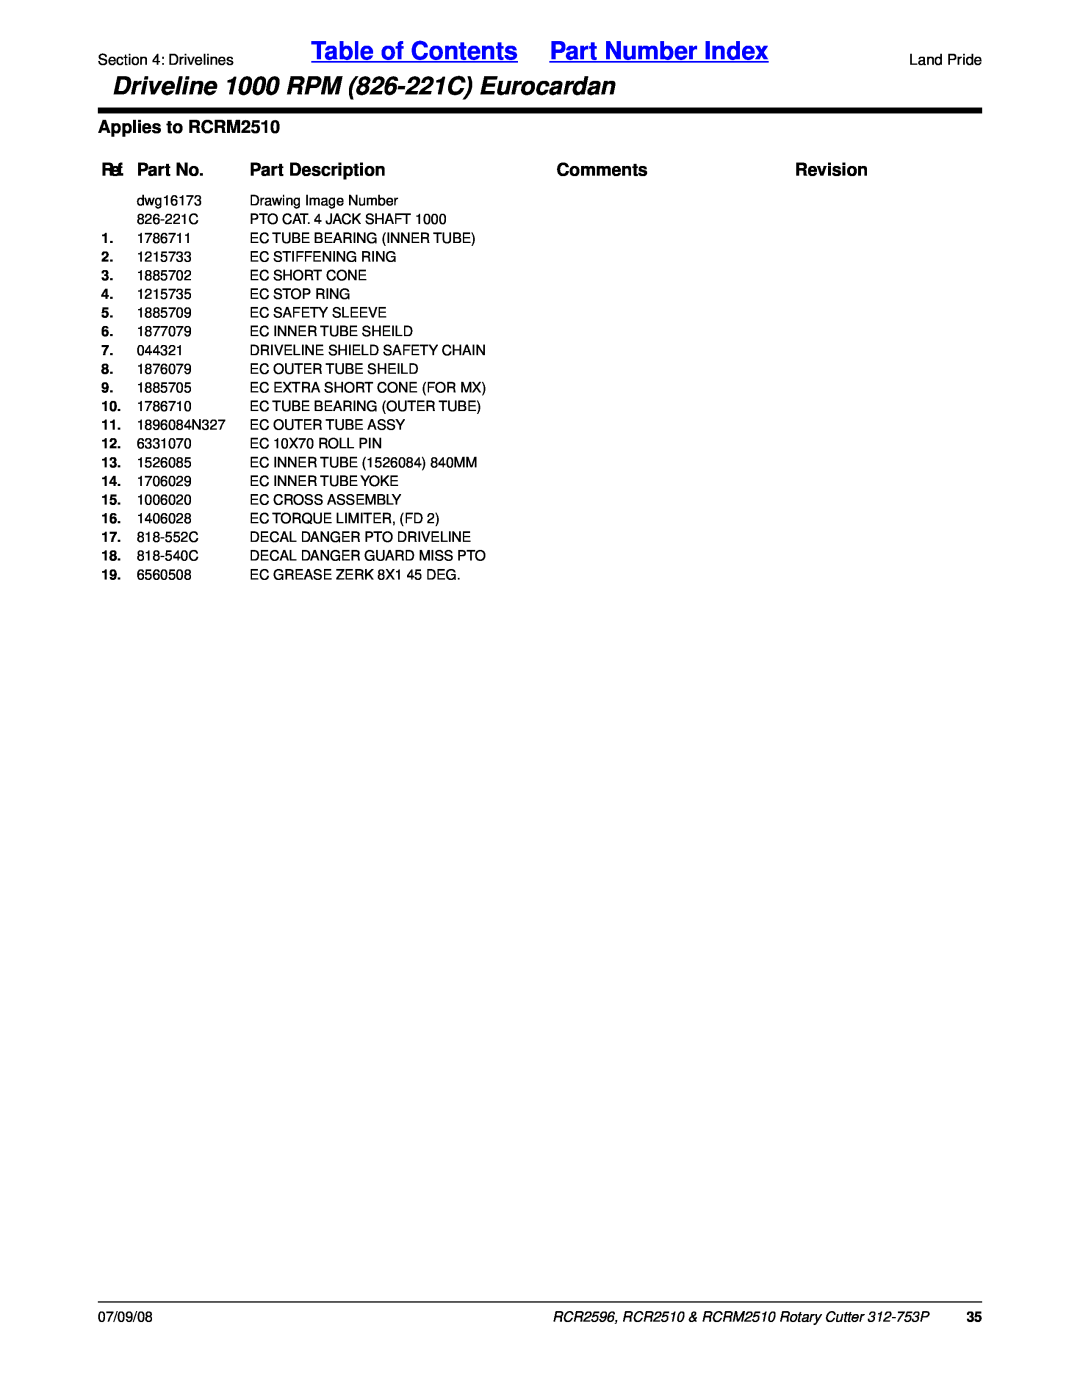 Land Pride RCR2510 manual Table of Contents Part Number Index, Driveline 1000 RPM 826-221CEurocardan, Applies to RCRM2510 